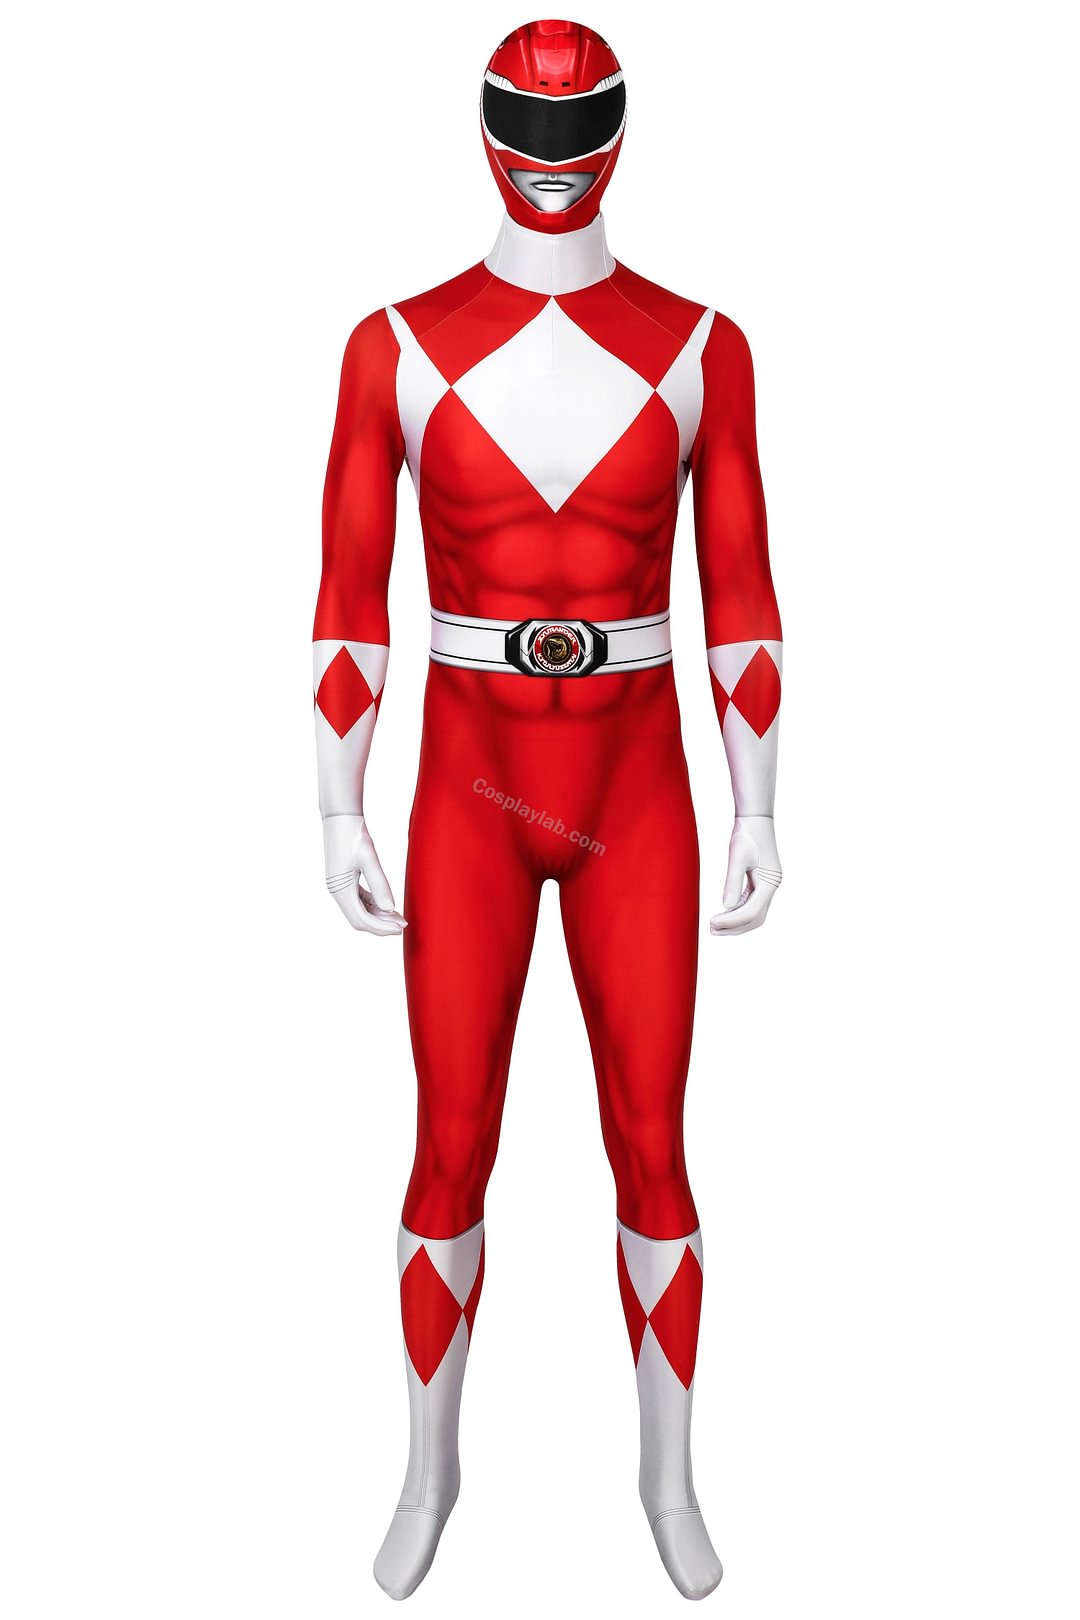 Red Ranger Cosplay Suit Power Rangers Red HQ Printed Spandex Costume Jumpsuit By CosplayLab